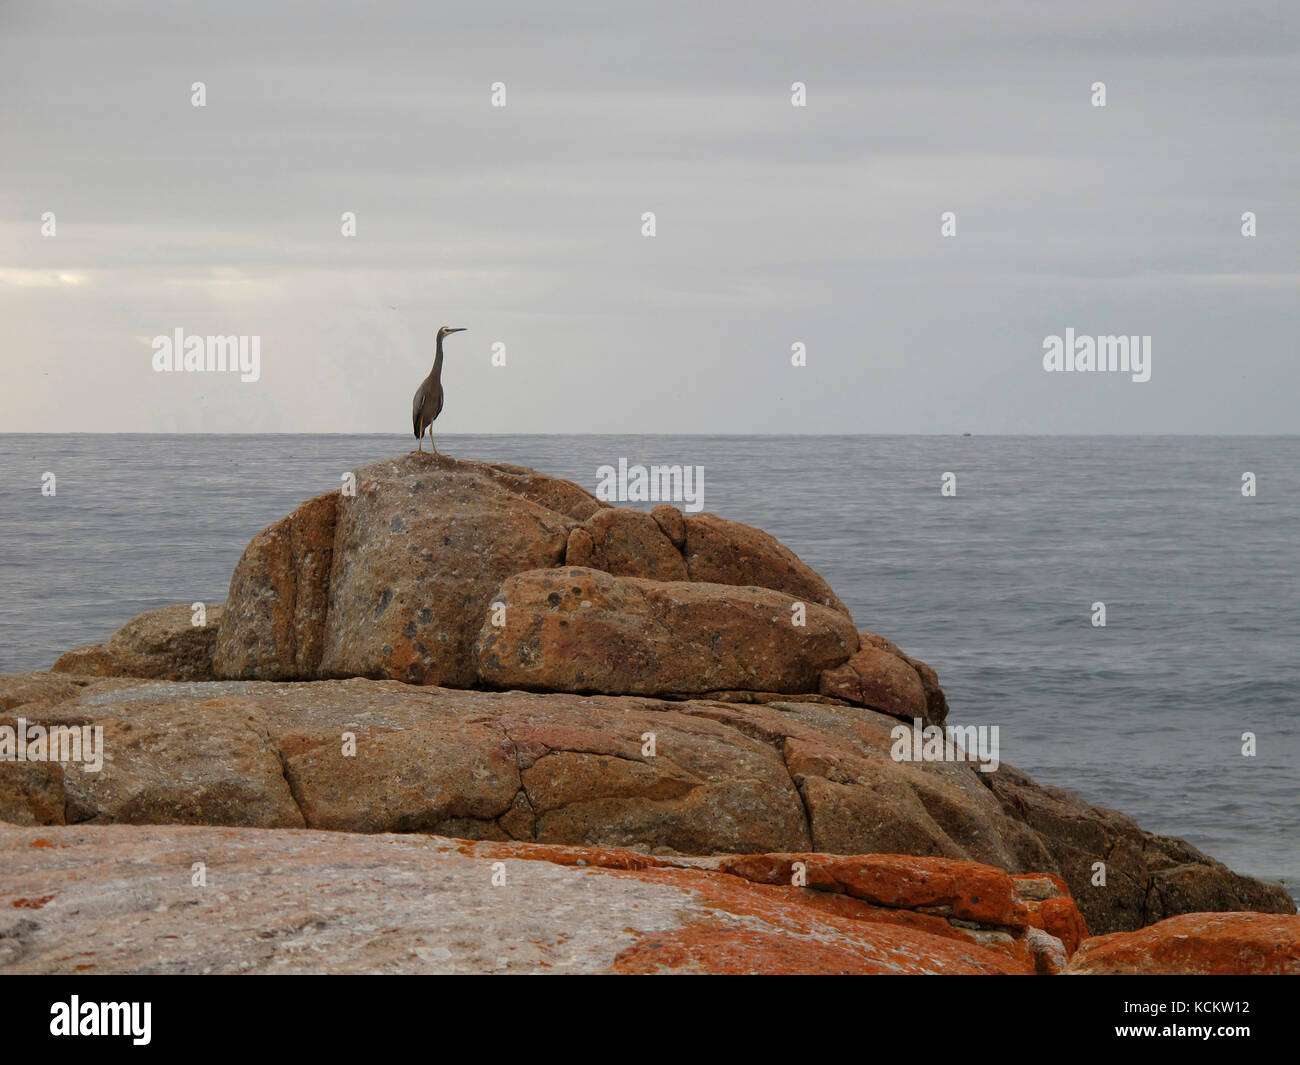 Red lichen-covered granite boulders on the foreshore, with a White-faced heron (Egretta novaehollandiae) surveying the water. Bicheno, eastern Tasmani Stock Photo